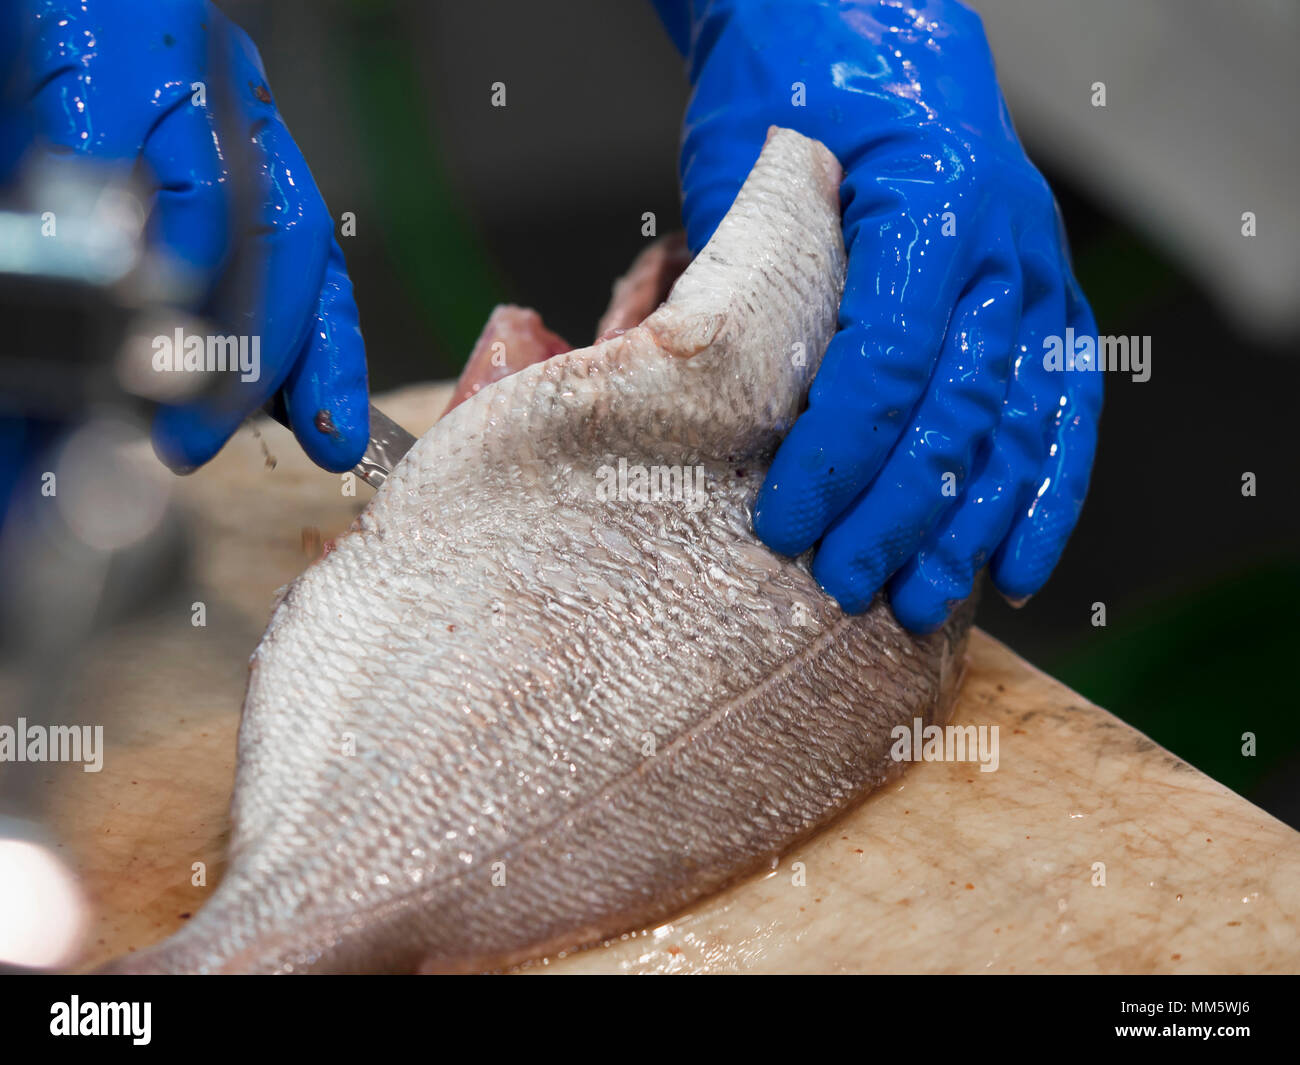 Close-up of man cutting fish with knife Stock Photo